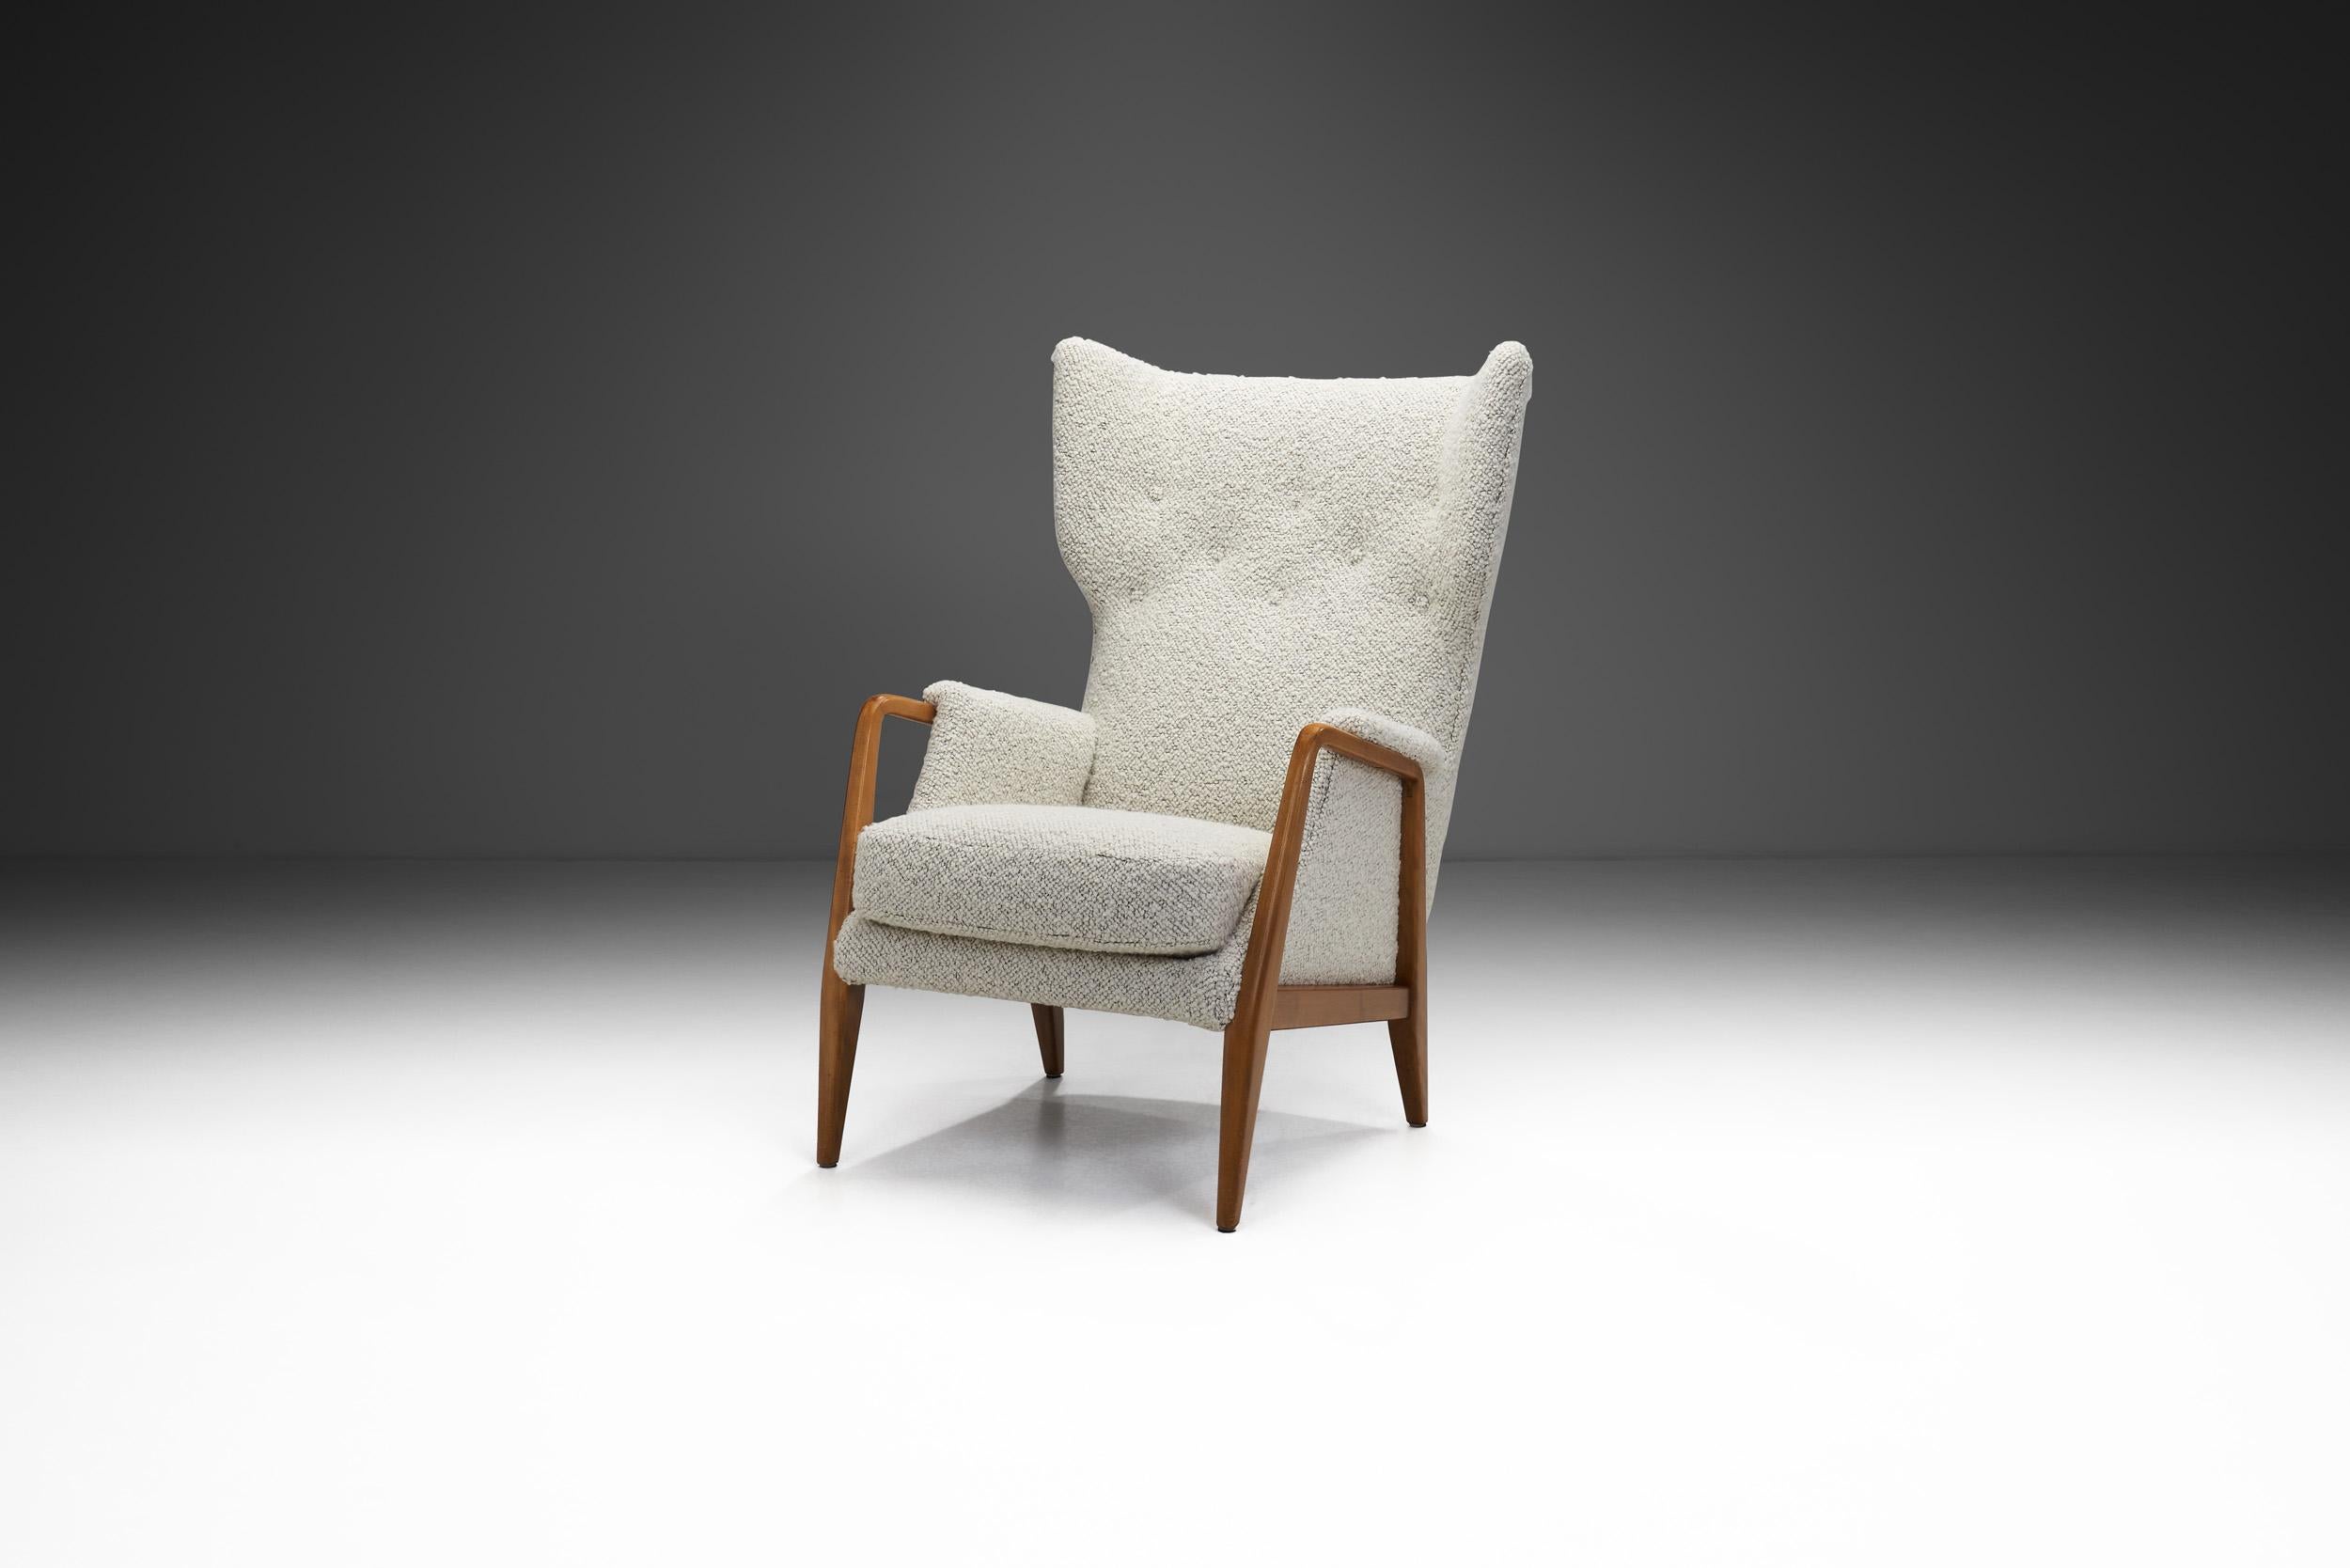 Scandinavian Modernism can be visually described by this beautiful wingback chair: sleek, organic and timeless. These attributes are met with high quality materials and the famous craftsmanship of Scandinavian cabinetmakers. This beautiful wingback